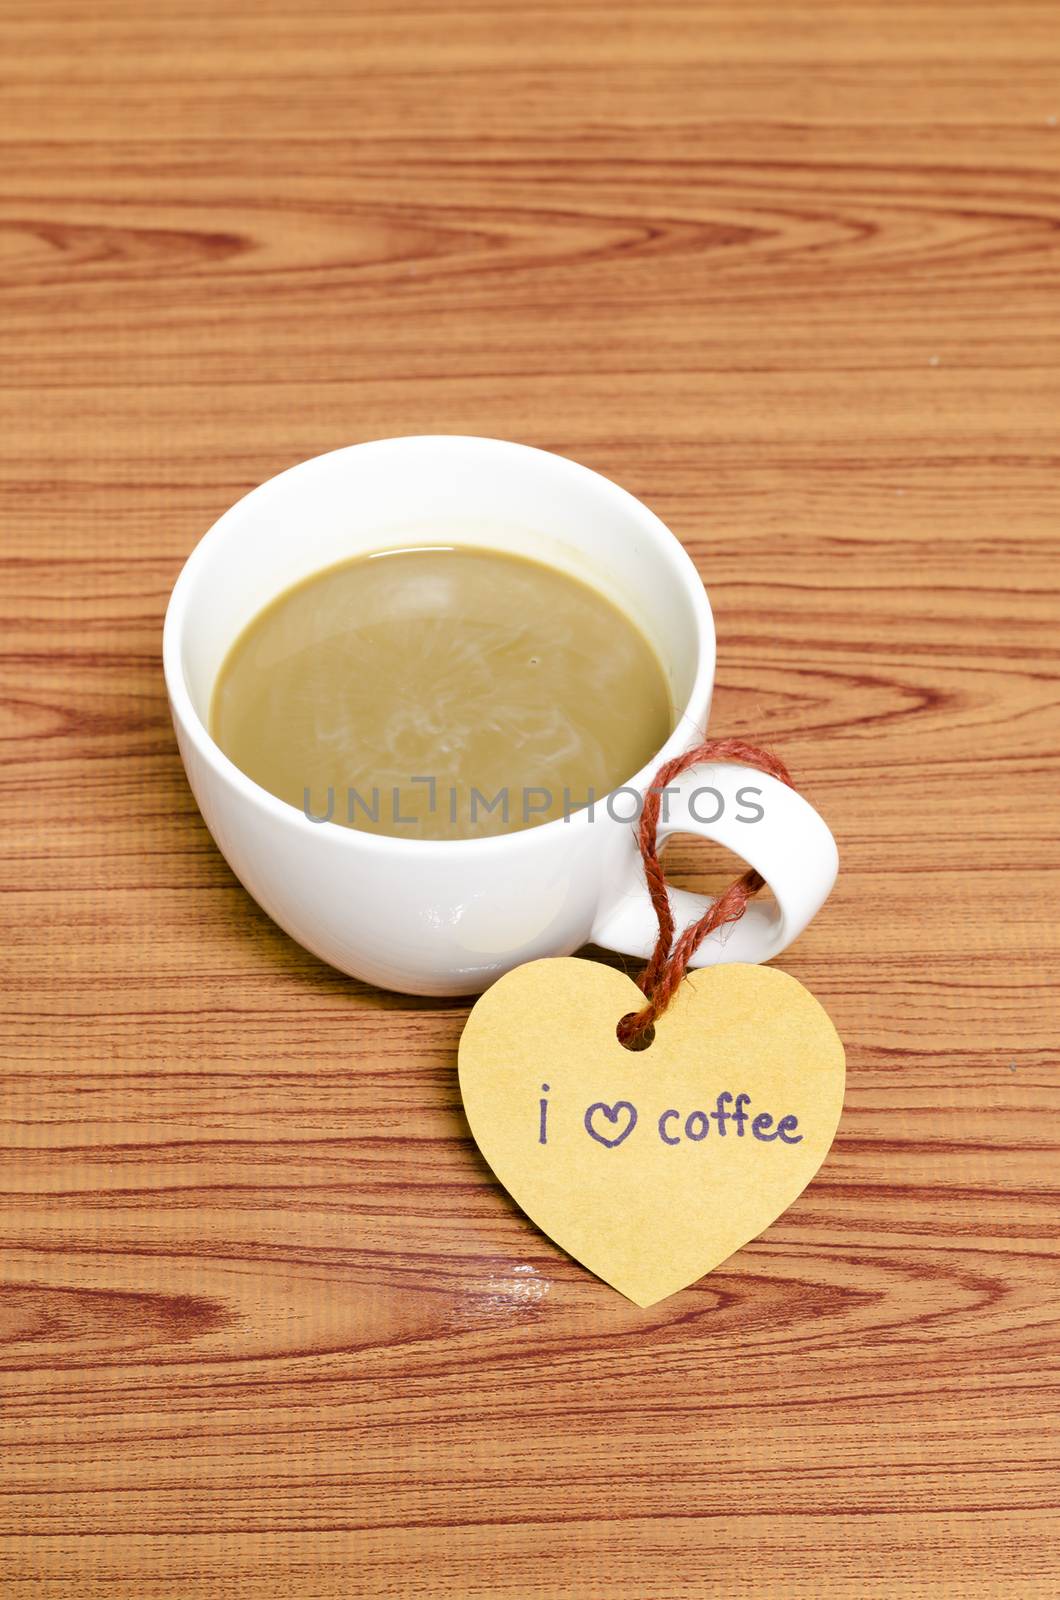 coffee cup with heart tag write I love coffee word by ammza12